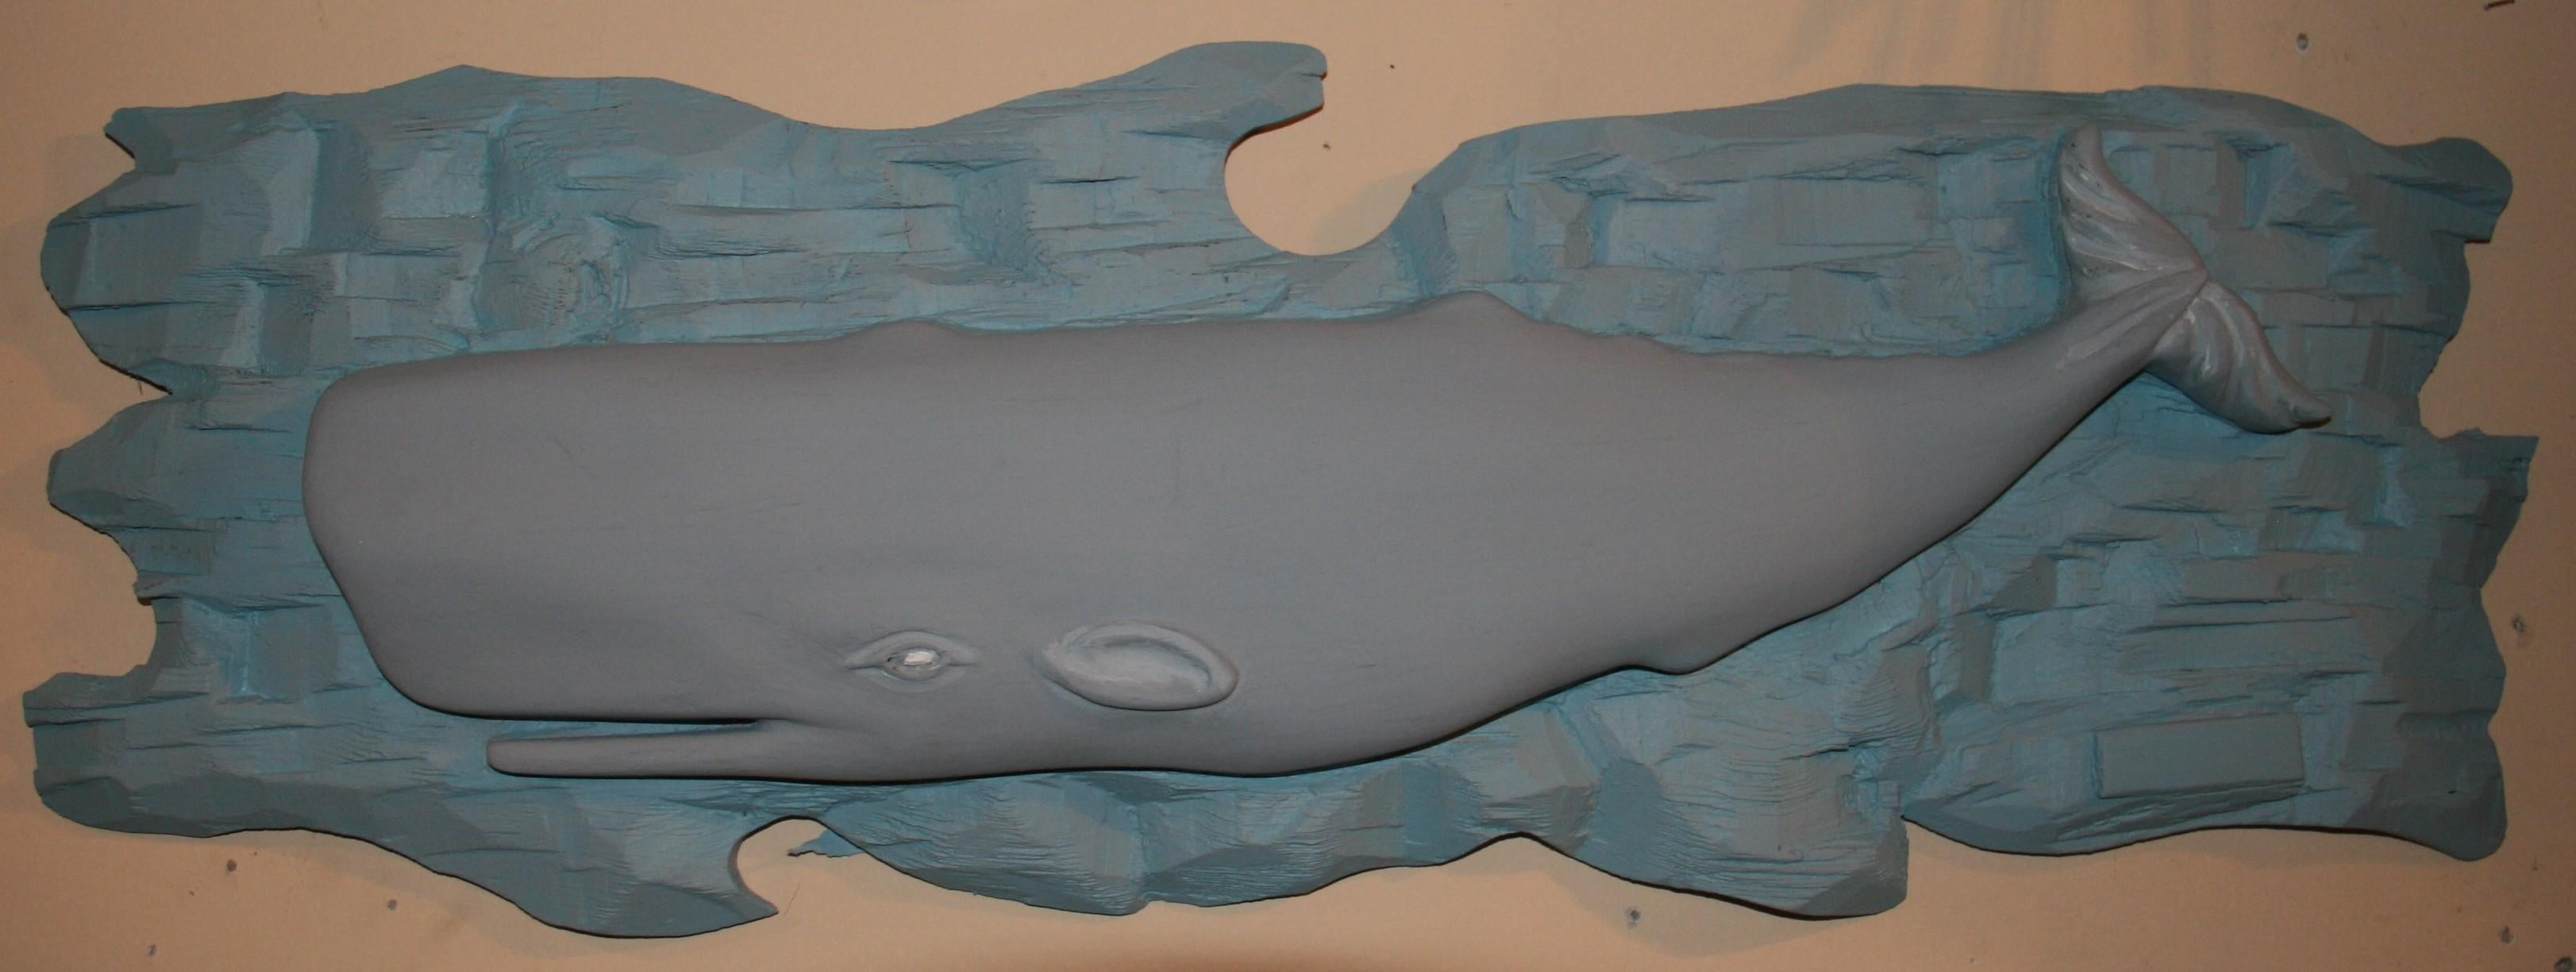 Provincetown Folk Art Carved Wood Whale Wall Sculpture For Sale 3